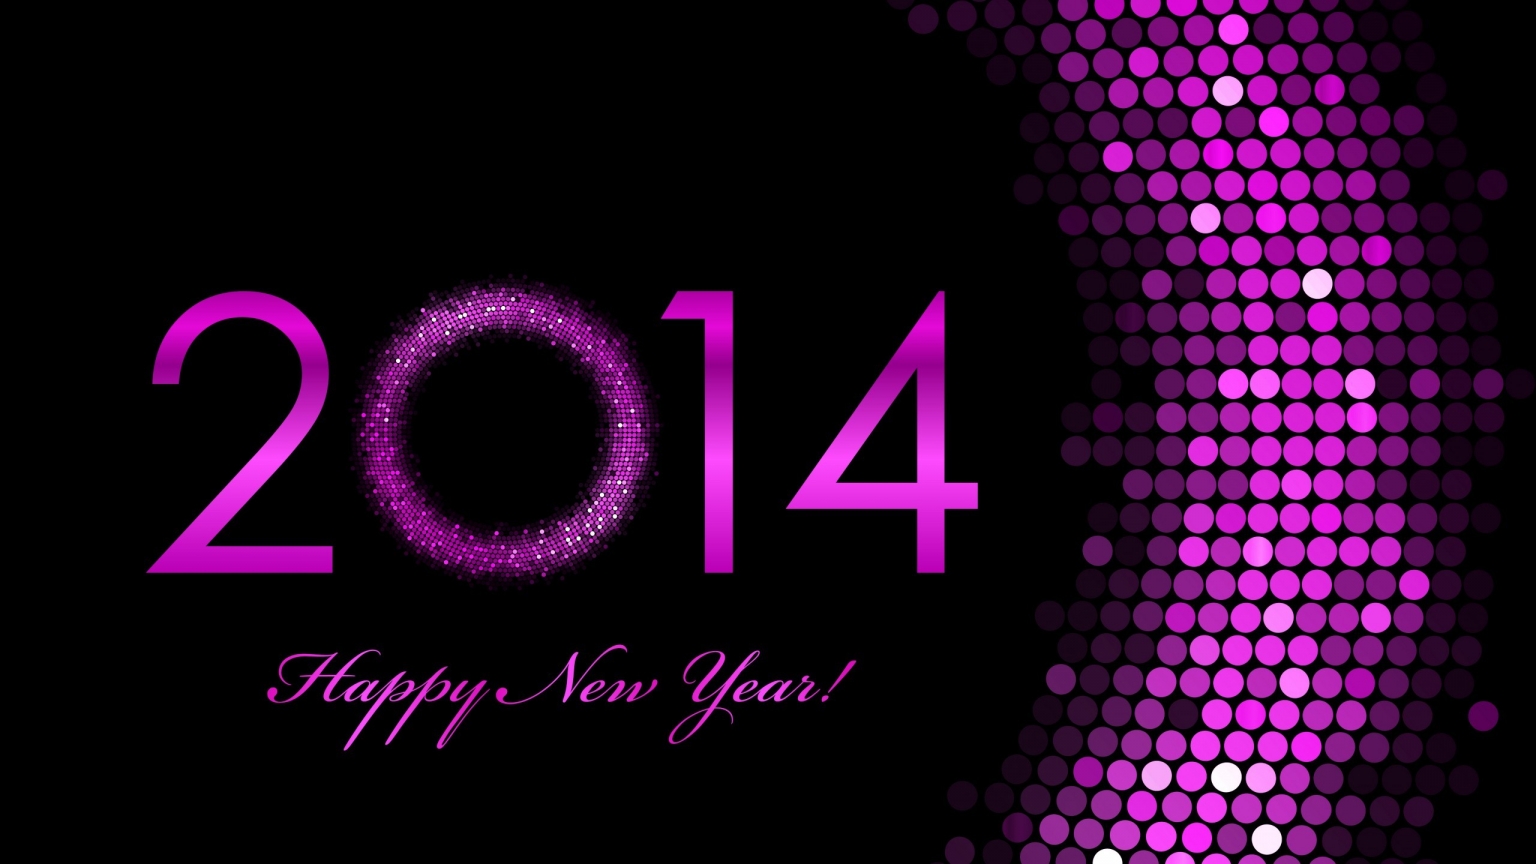 2014 Happy New Year for 1536 x 864 HDTV resolution